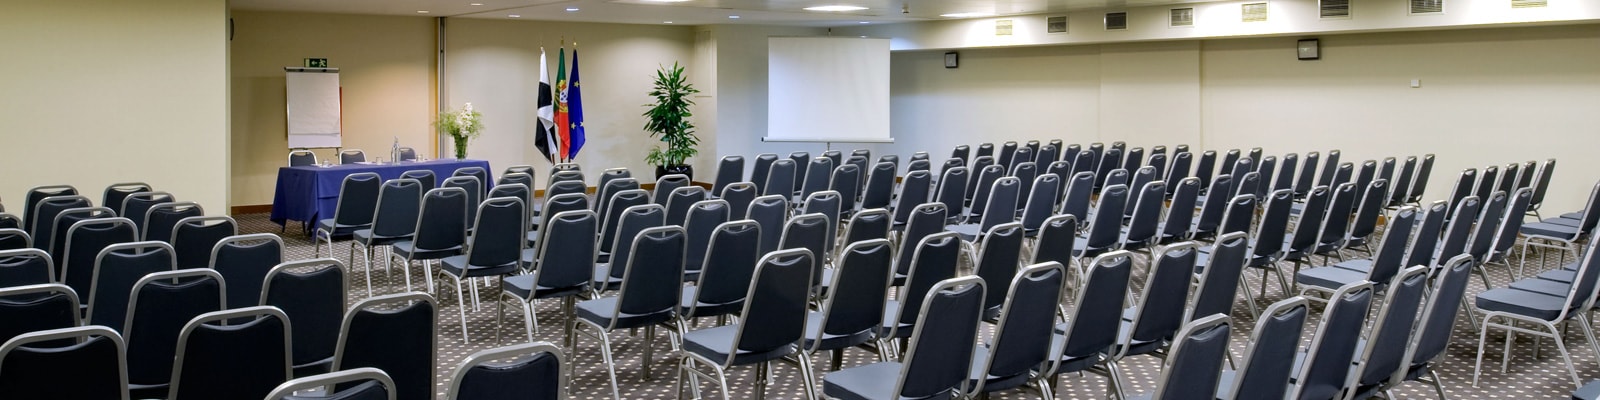 Meetings & Events Olissippo Hotels